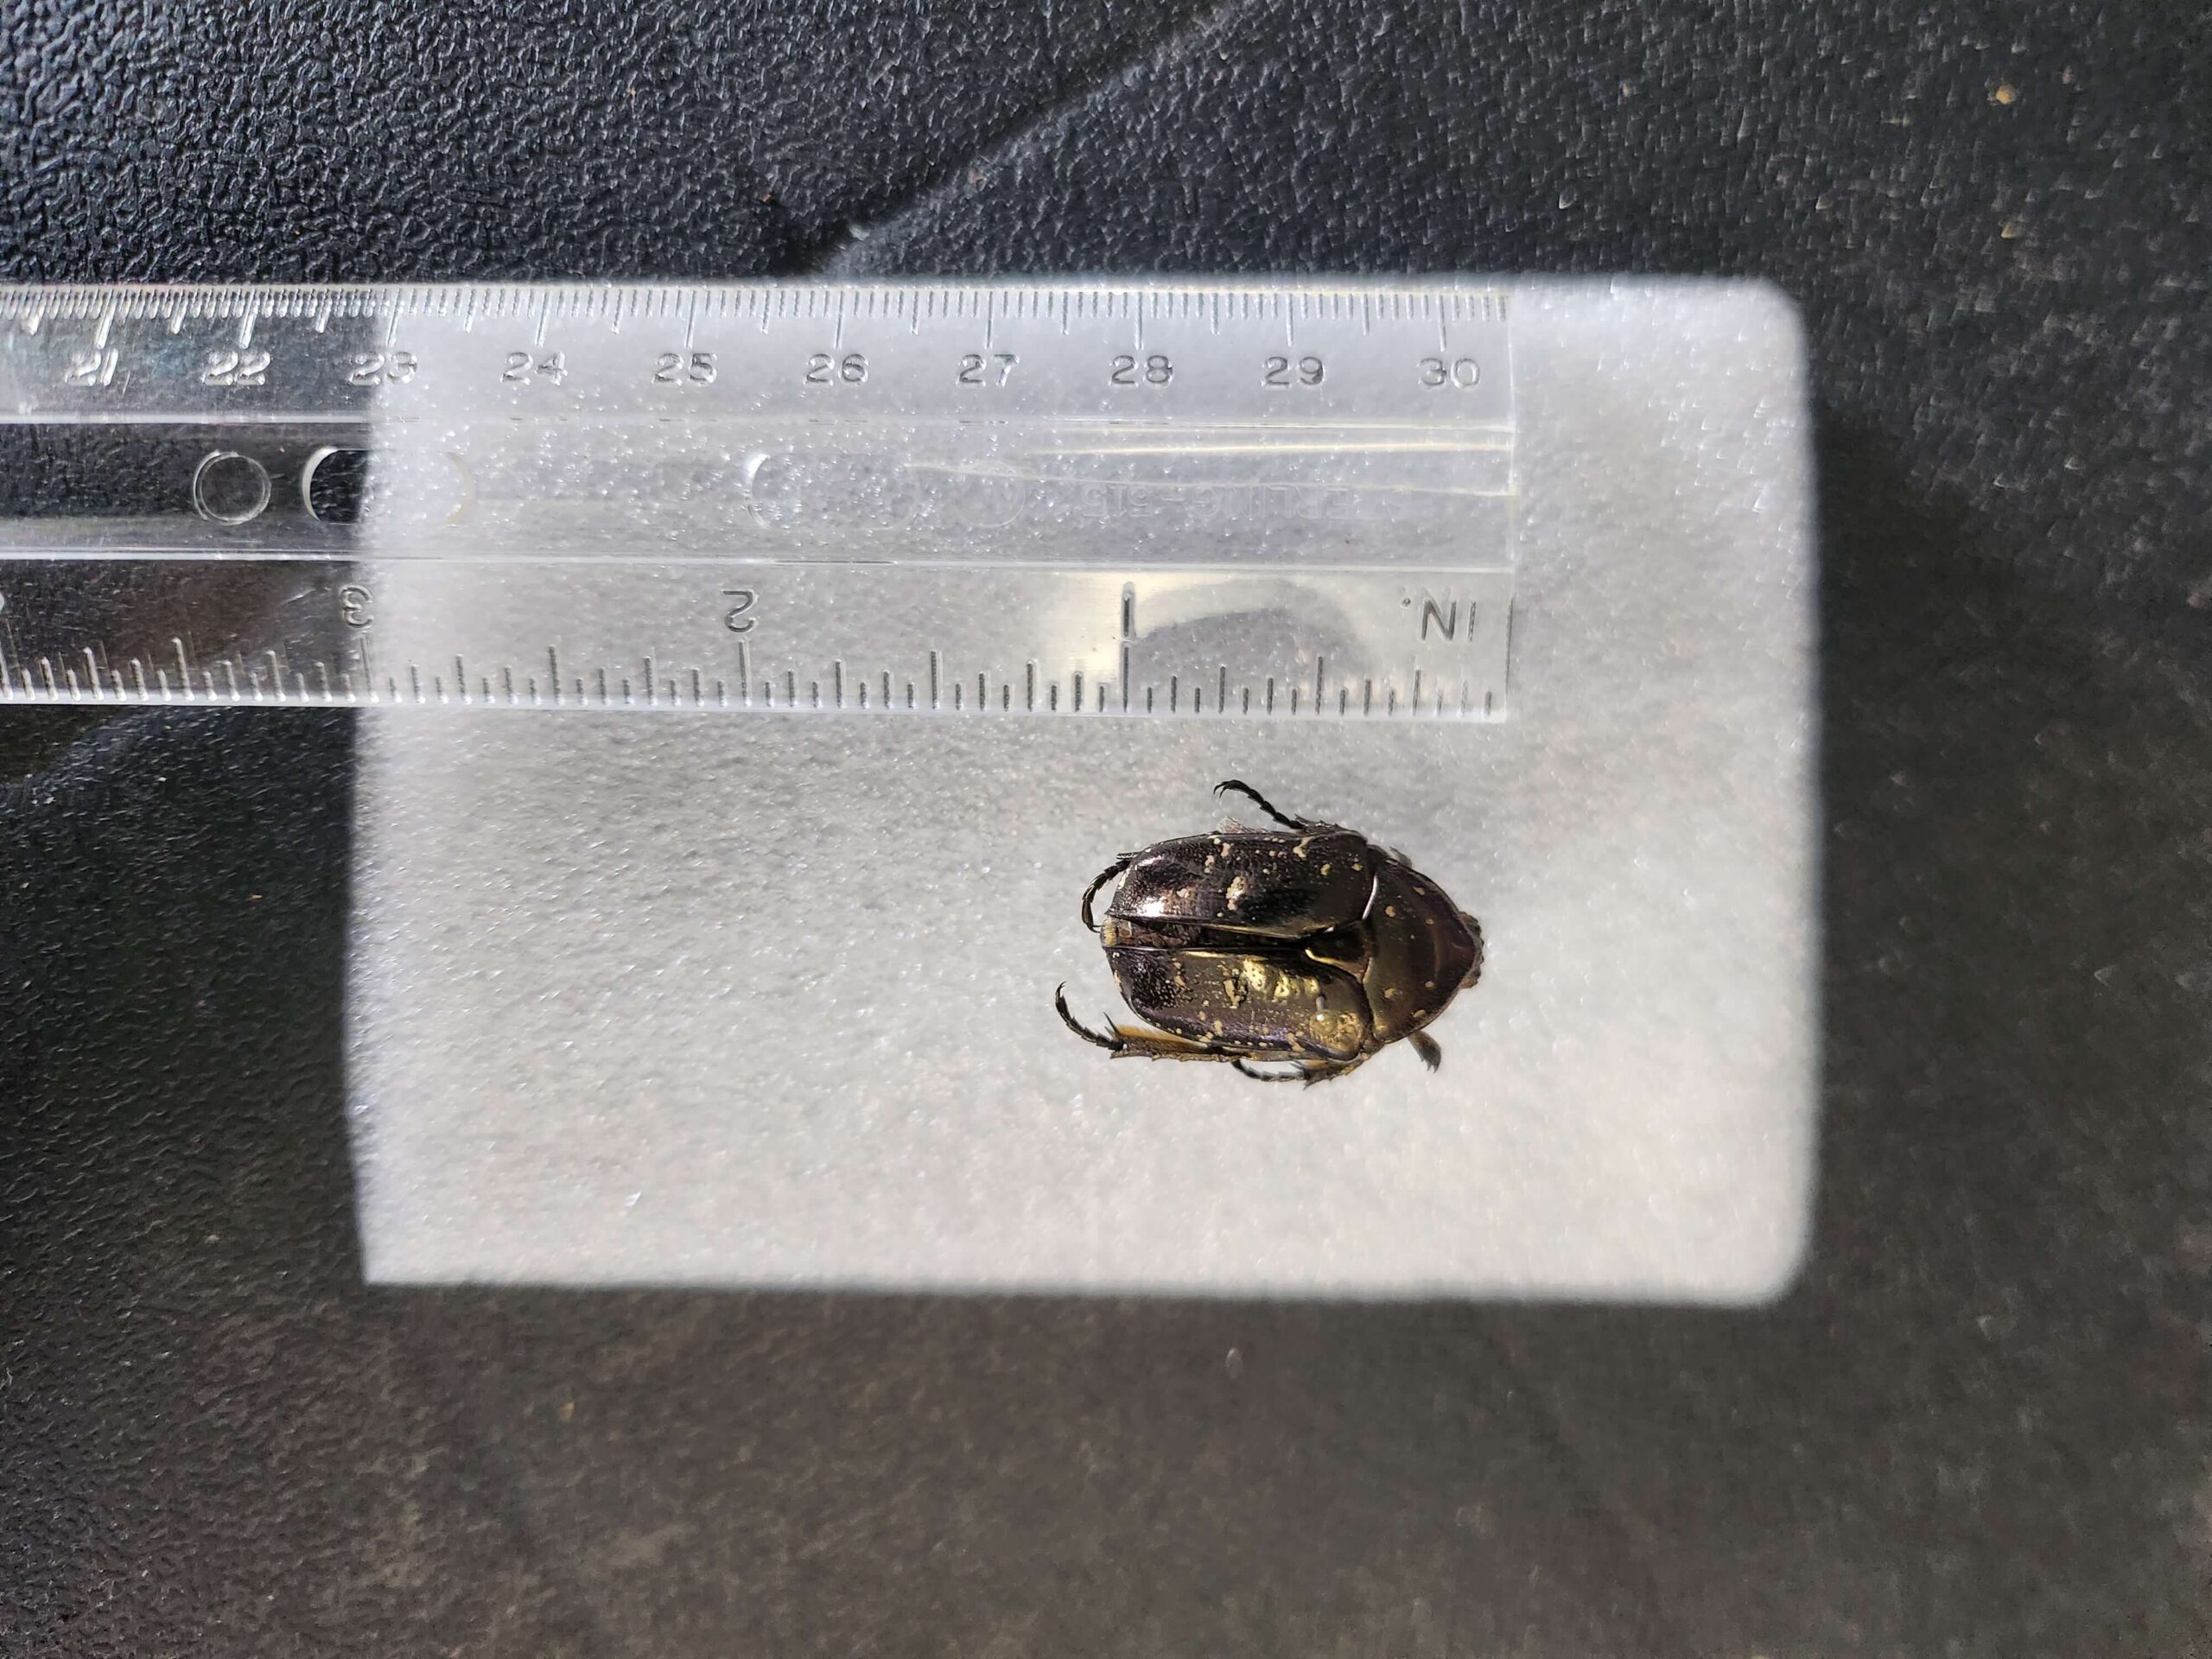 Half-inch brown beetle with bronze markings shown next to a ruler for scale